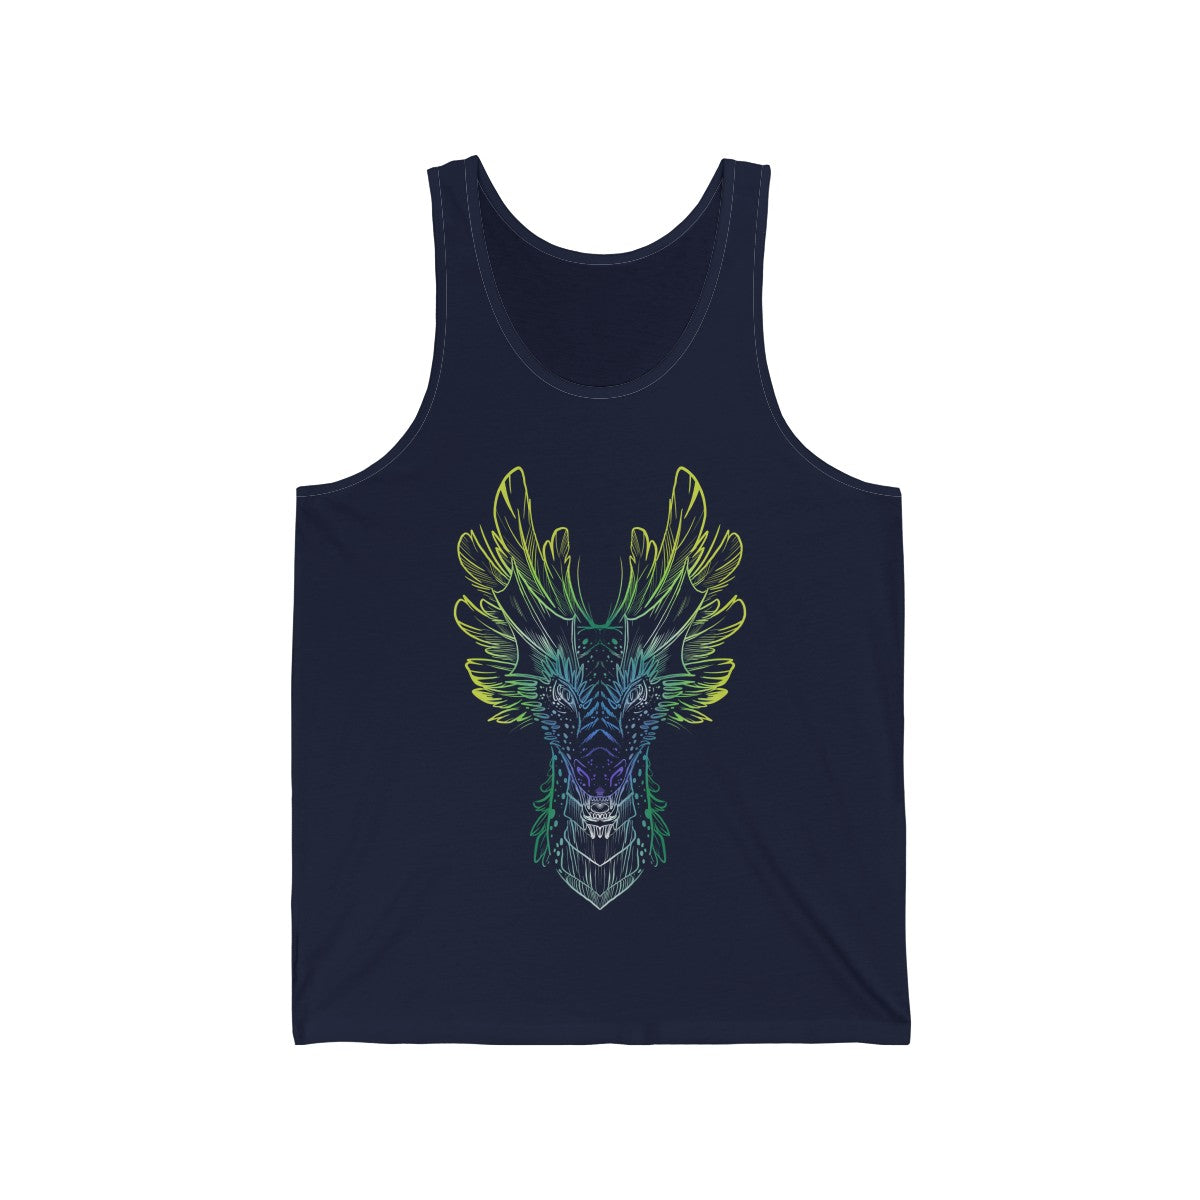 Drake Colored - Tank Top Tank Top Dire Creatures Navy Blue XS 